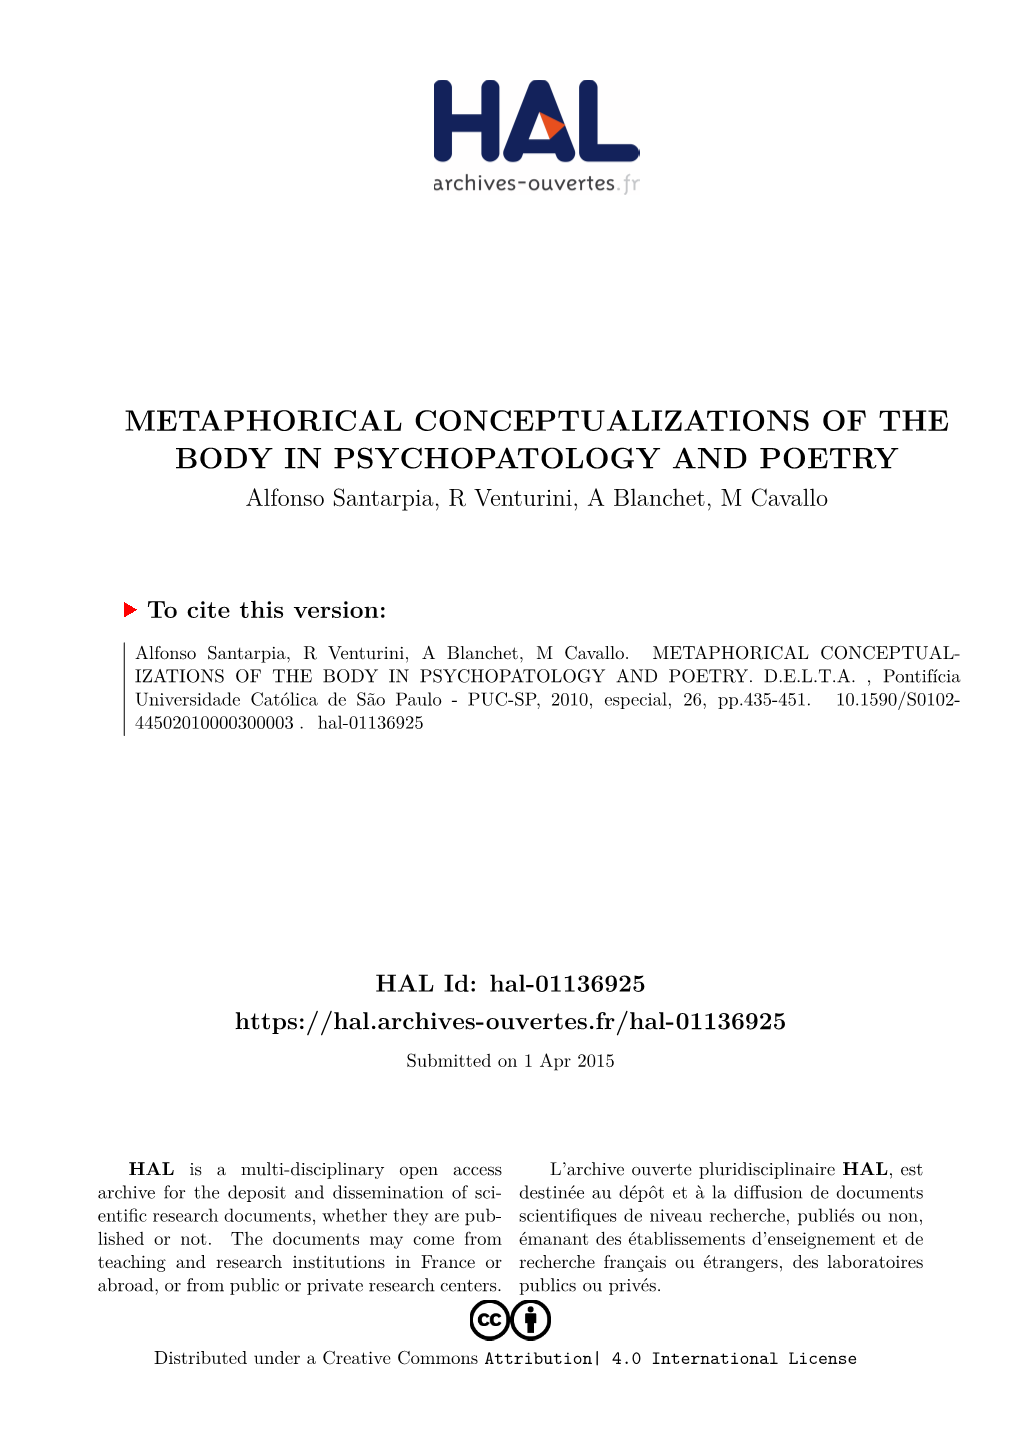 METAPHORICAL CONCEPTUALIZATIONS of the BODY in PSYCHOPATOLOGY and POETRY Alfonso Santarpia, R Venturini, a Blanchet, M Cavallo